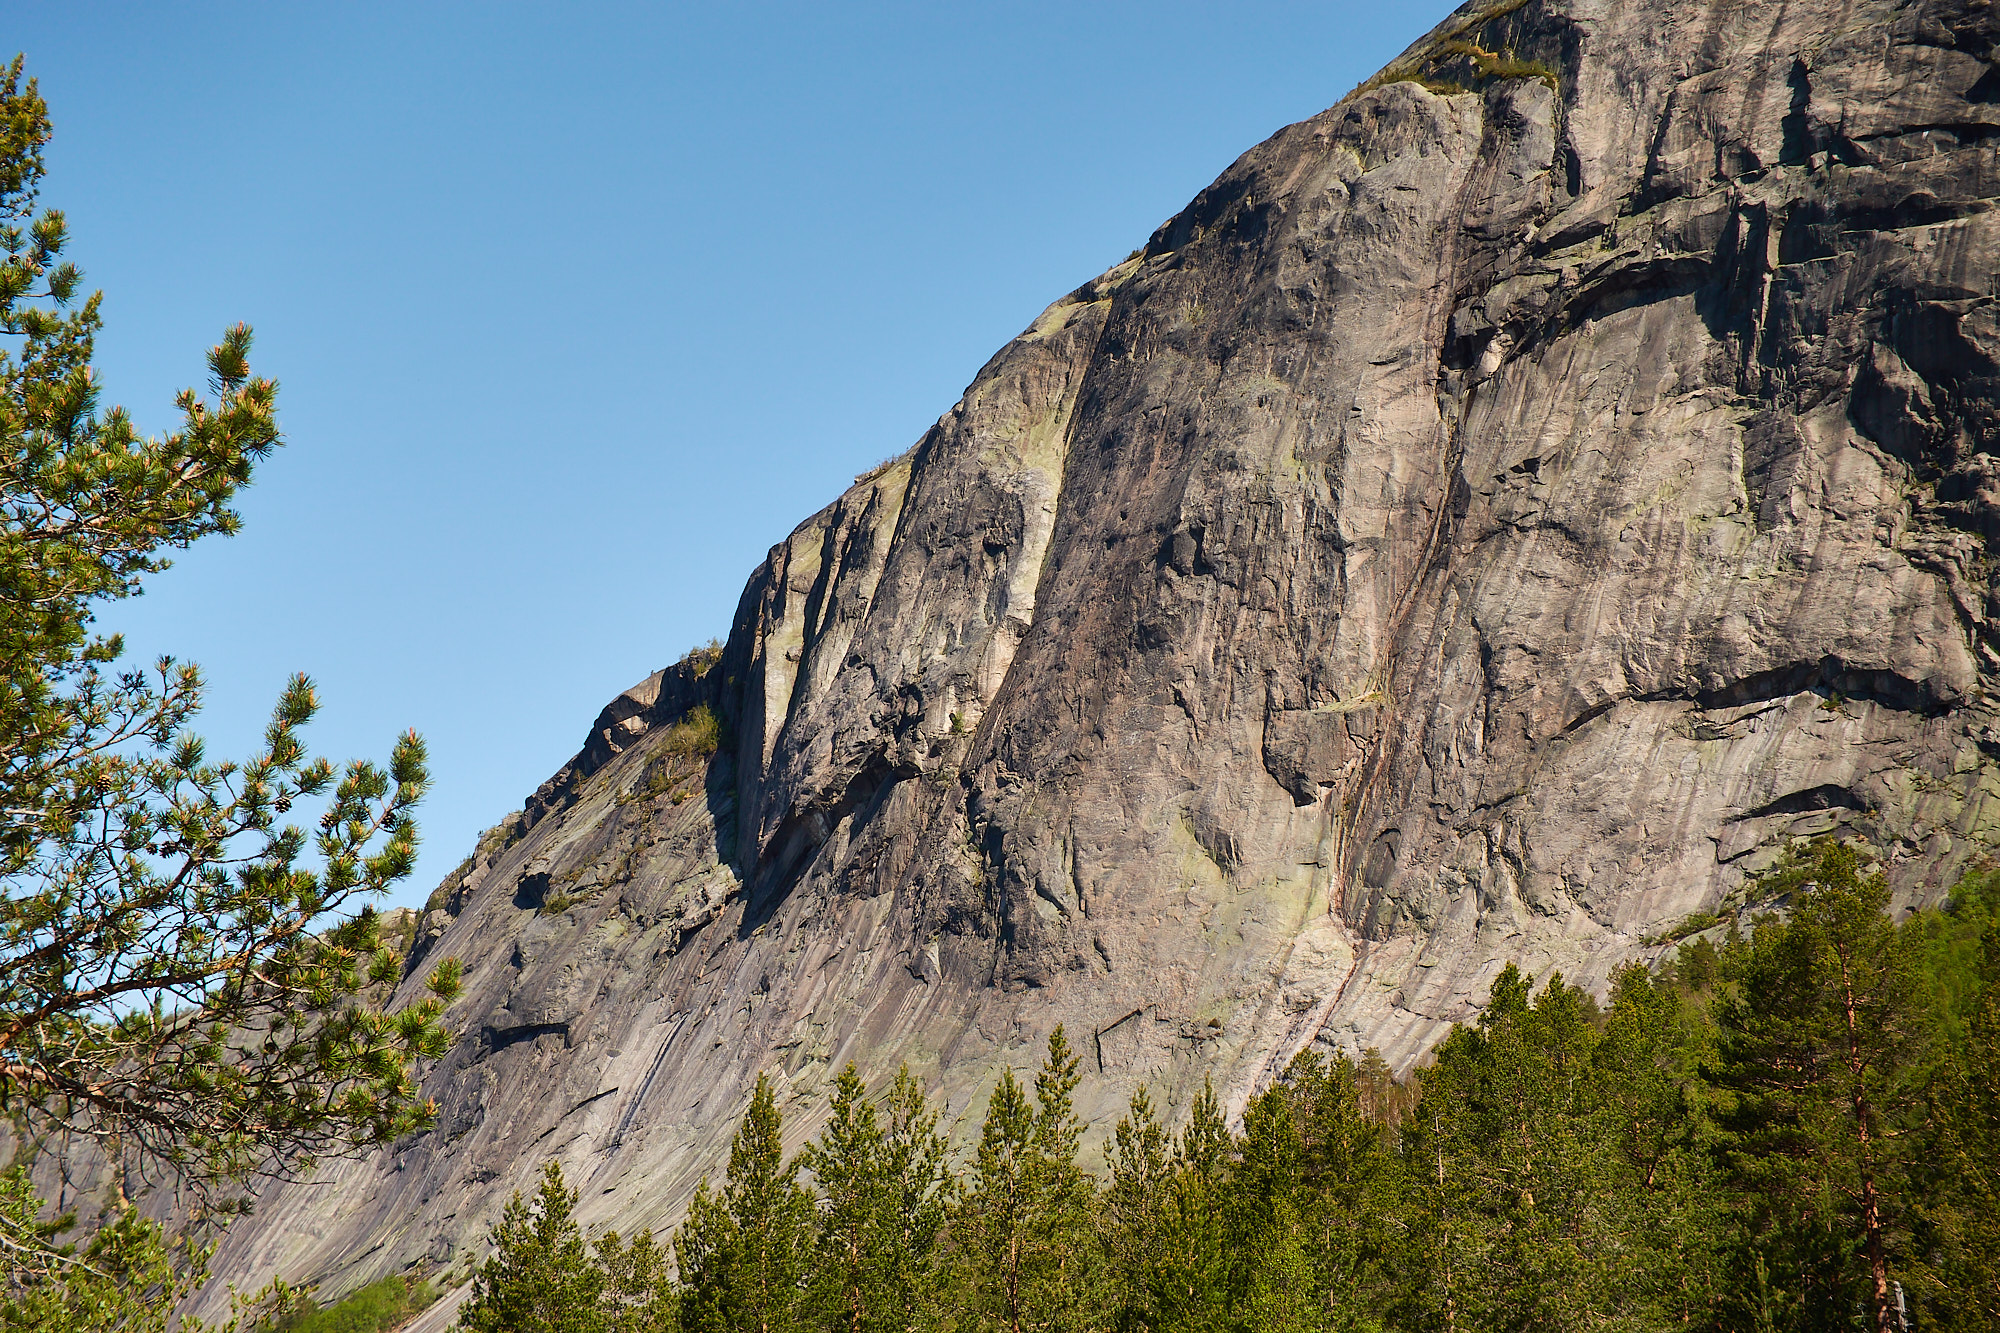 A picture of the South Face of Haegefjell showing the rock climbs of Haegar and Mot Sola